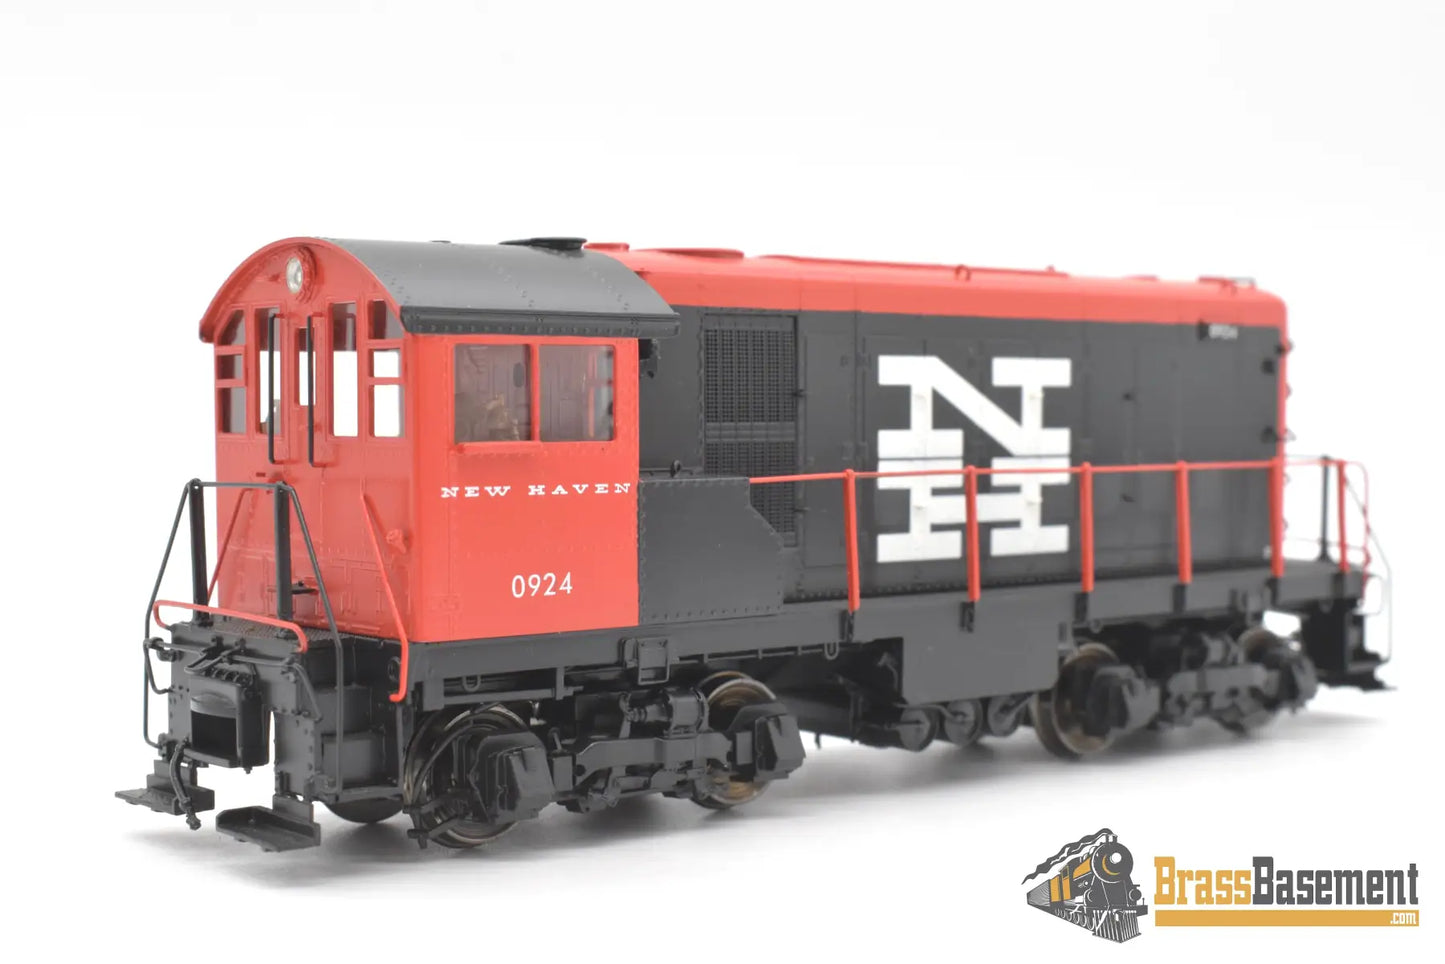 Ho Brass - Omi 6355.1 New Haven Hh660 #0924 Switcher Mcginnis Paint Only 30 Produced Diesel